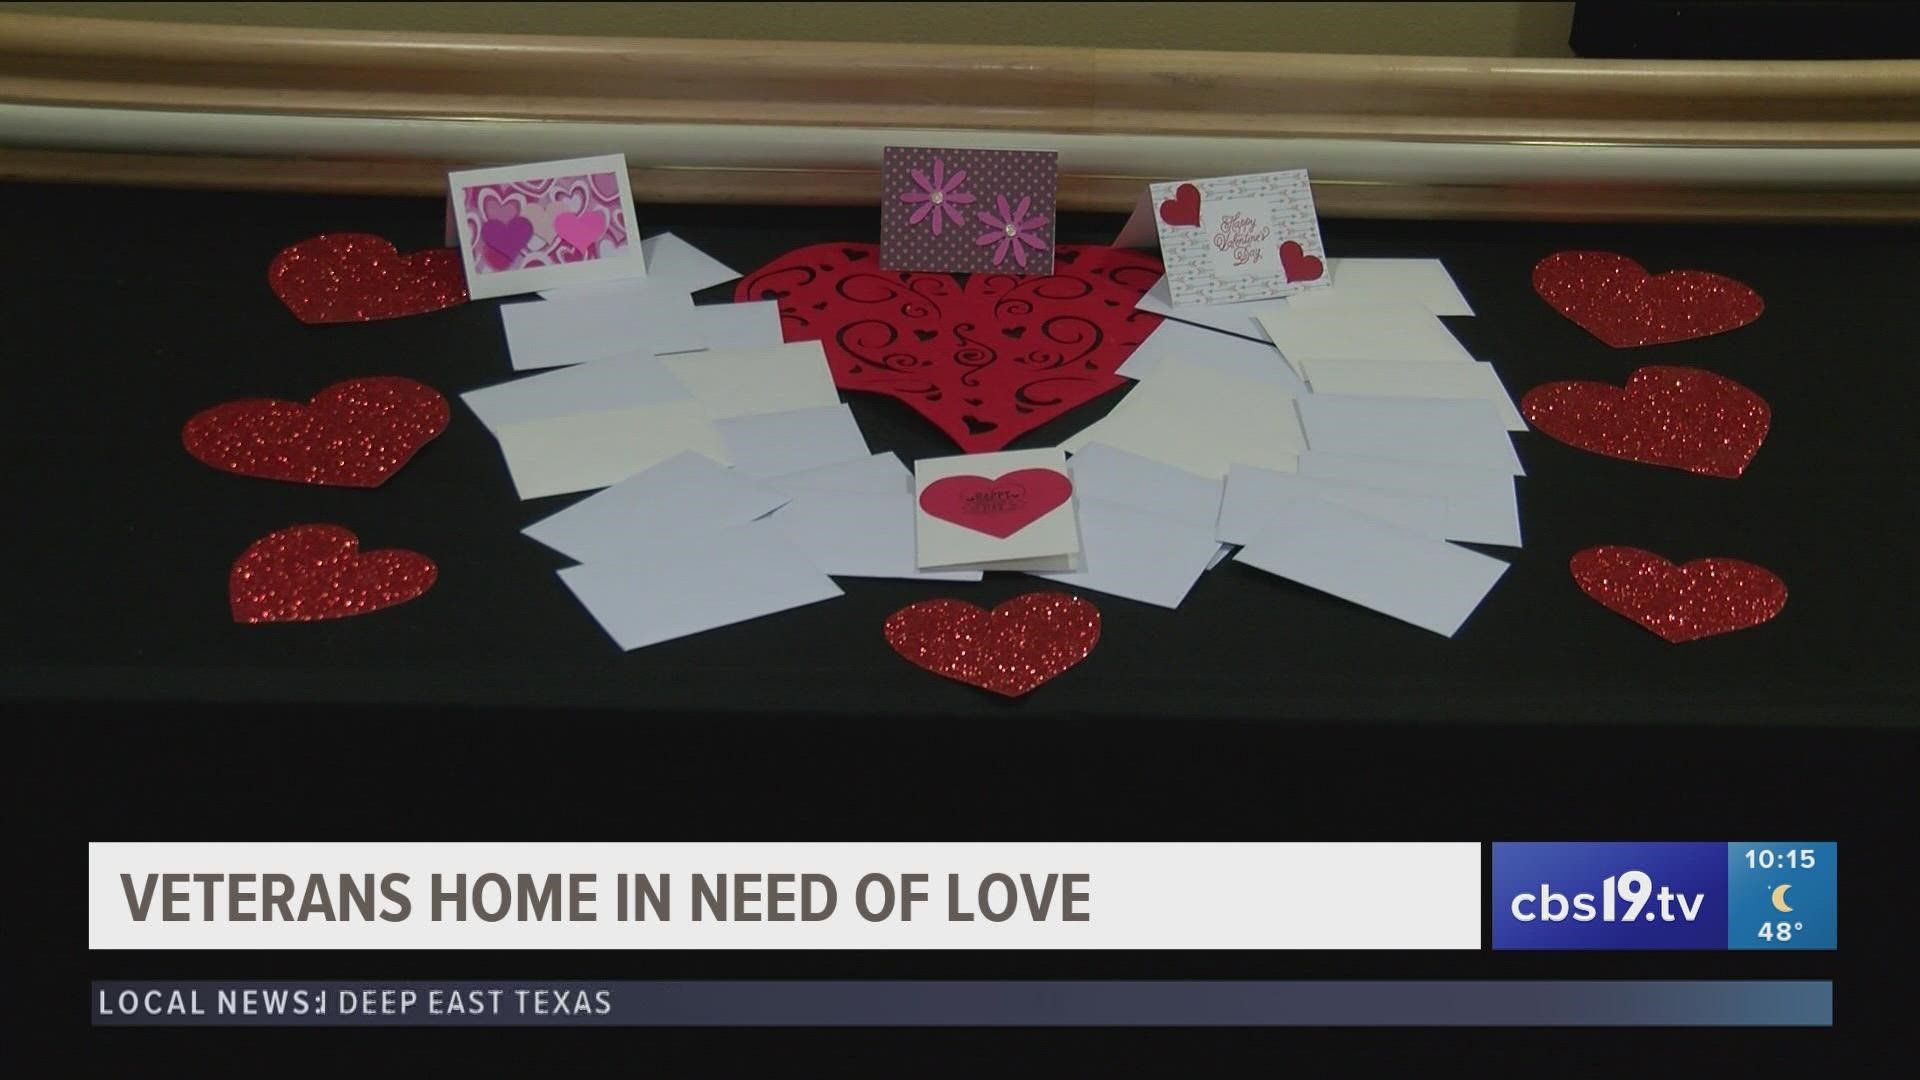 Watkins-Logan Texas State Veterans Home's director of activities, Christina Randolph is asking locals to shower the veterans with Valentine's cards this season.